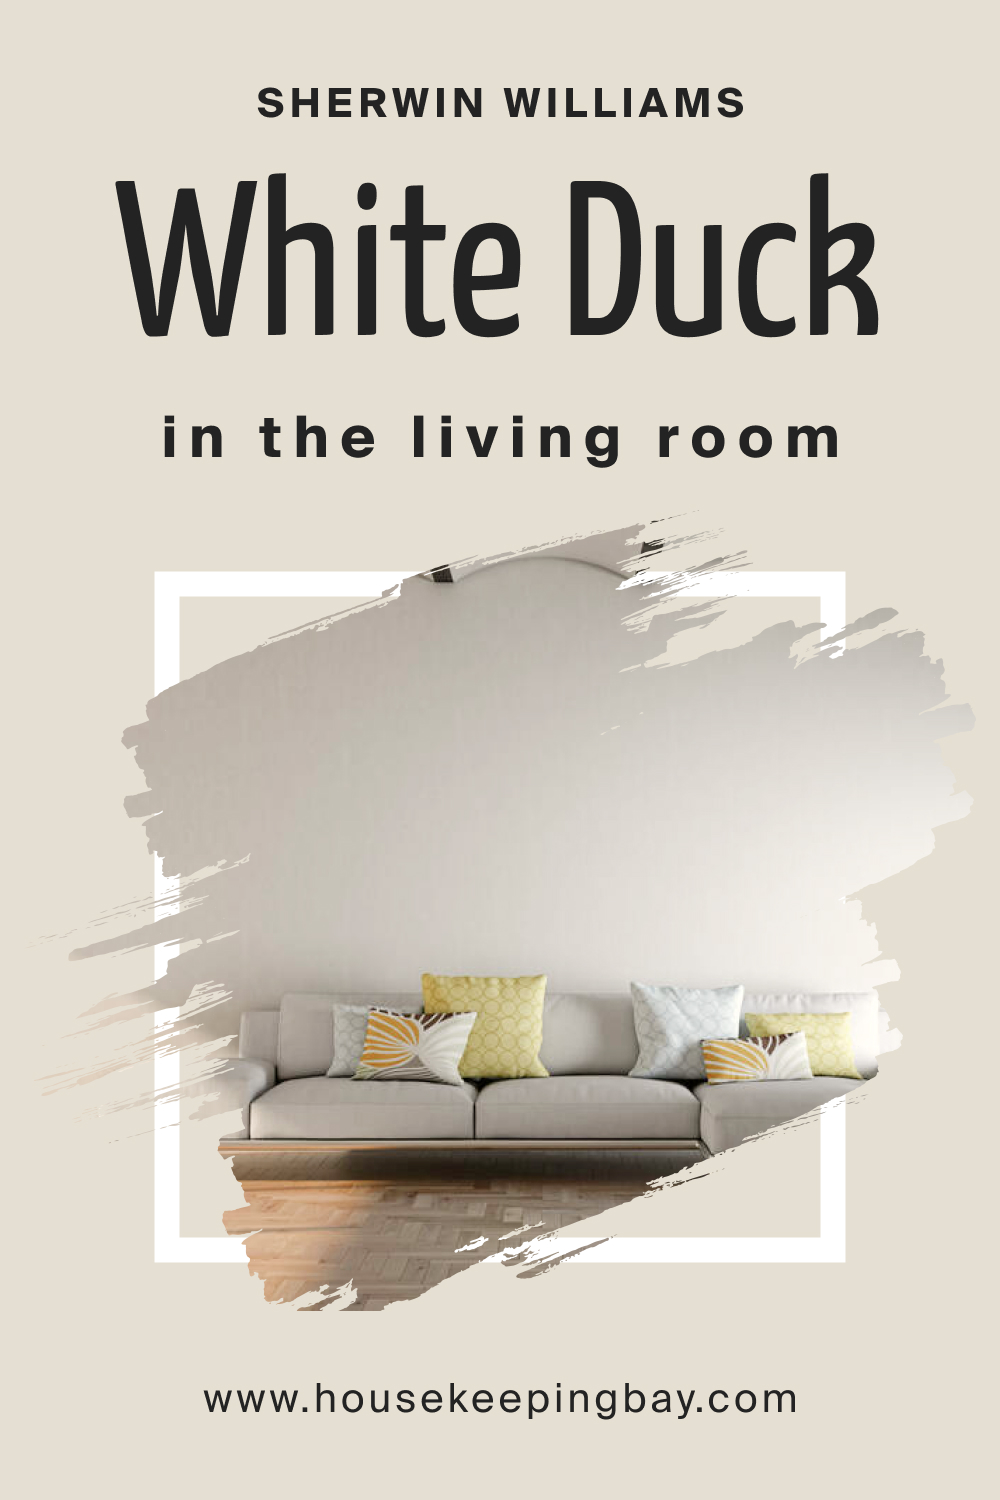 Sherwin Williams. SW White Duck In the Living Room